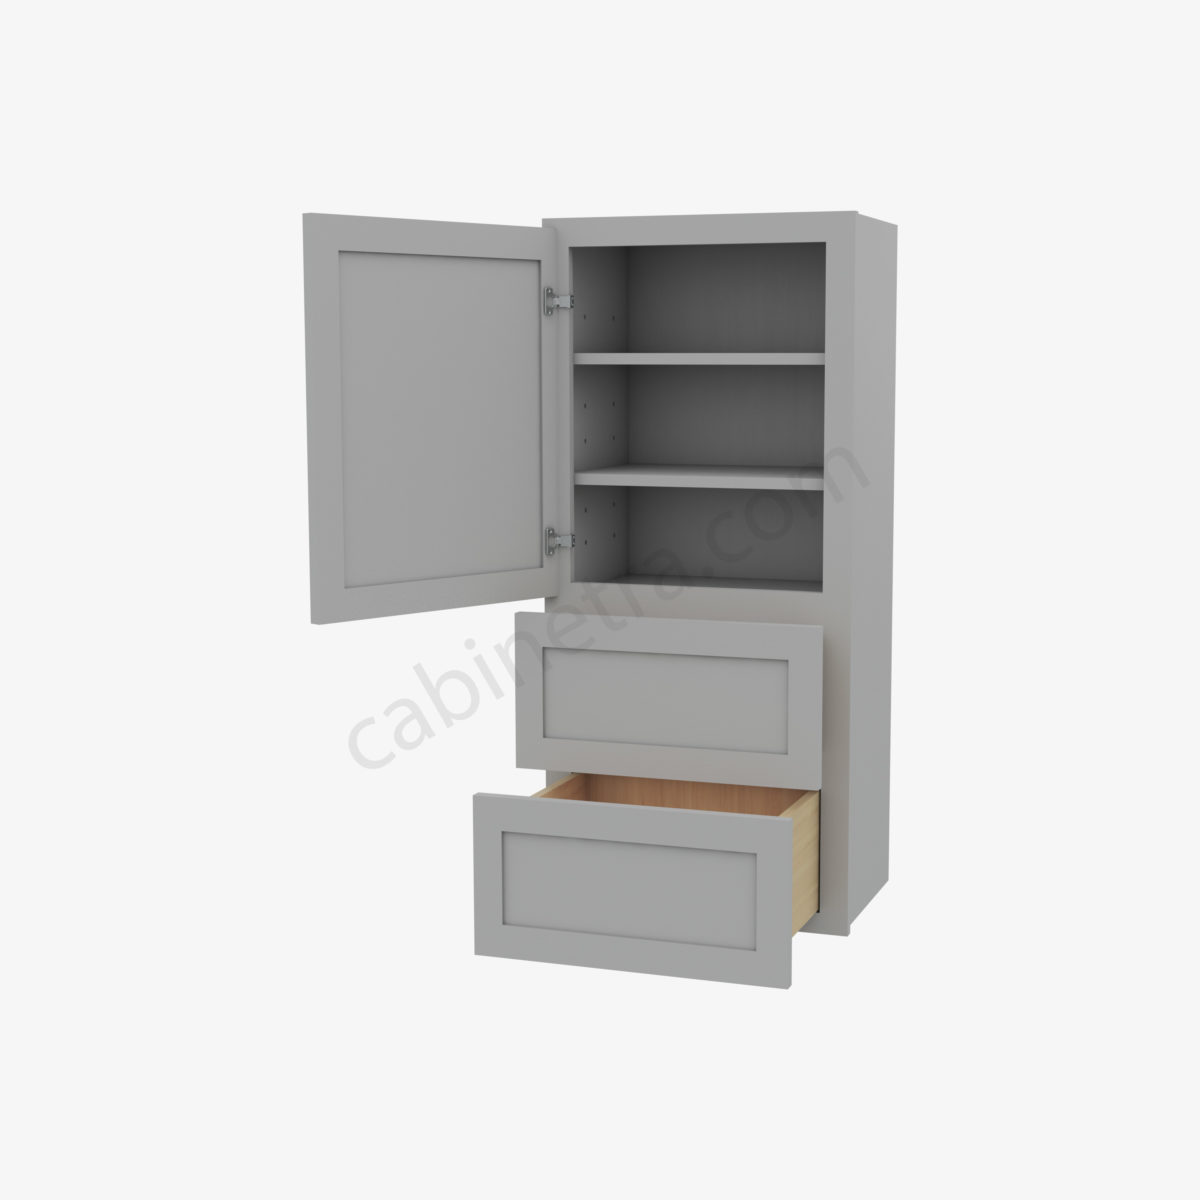 AB W2D1848 5 Forevermark Lait Gray Shaker Cabinetra scaled